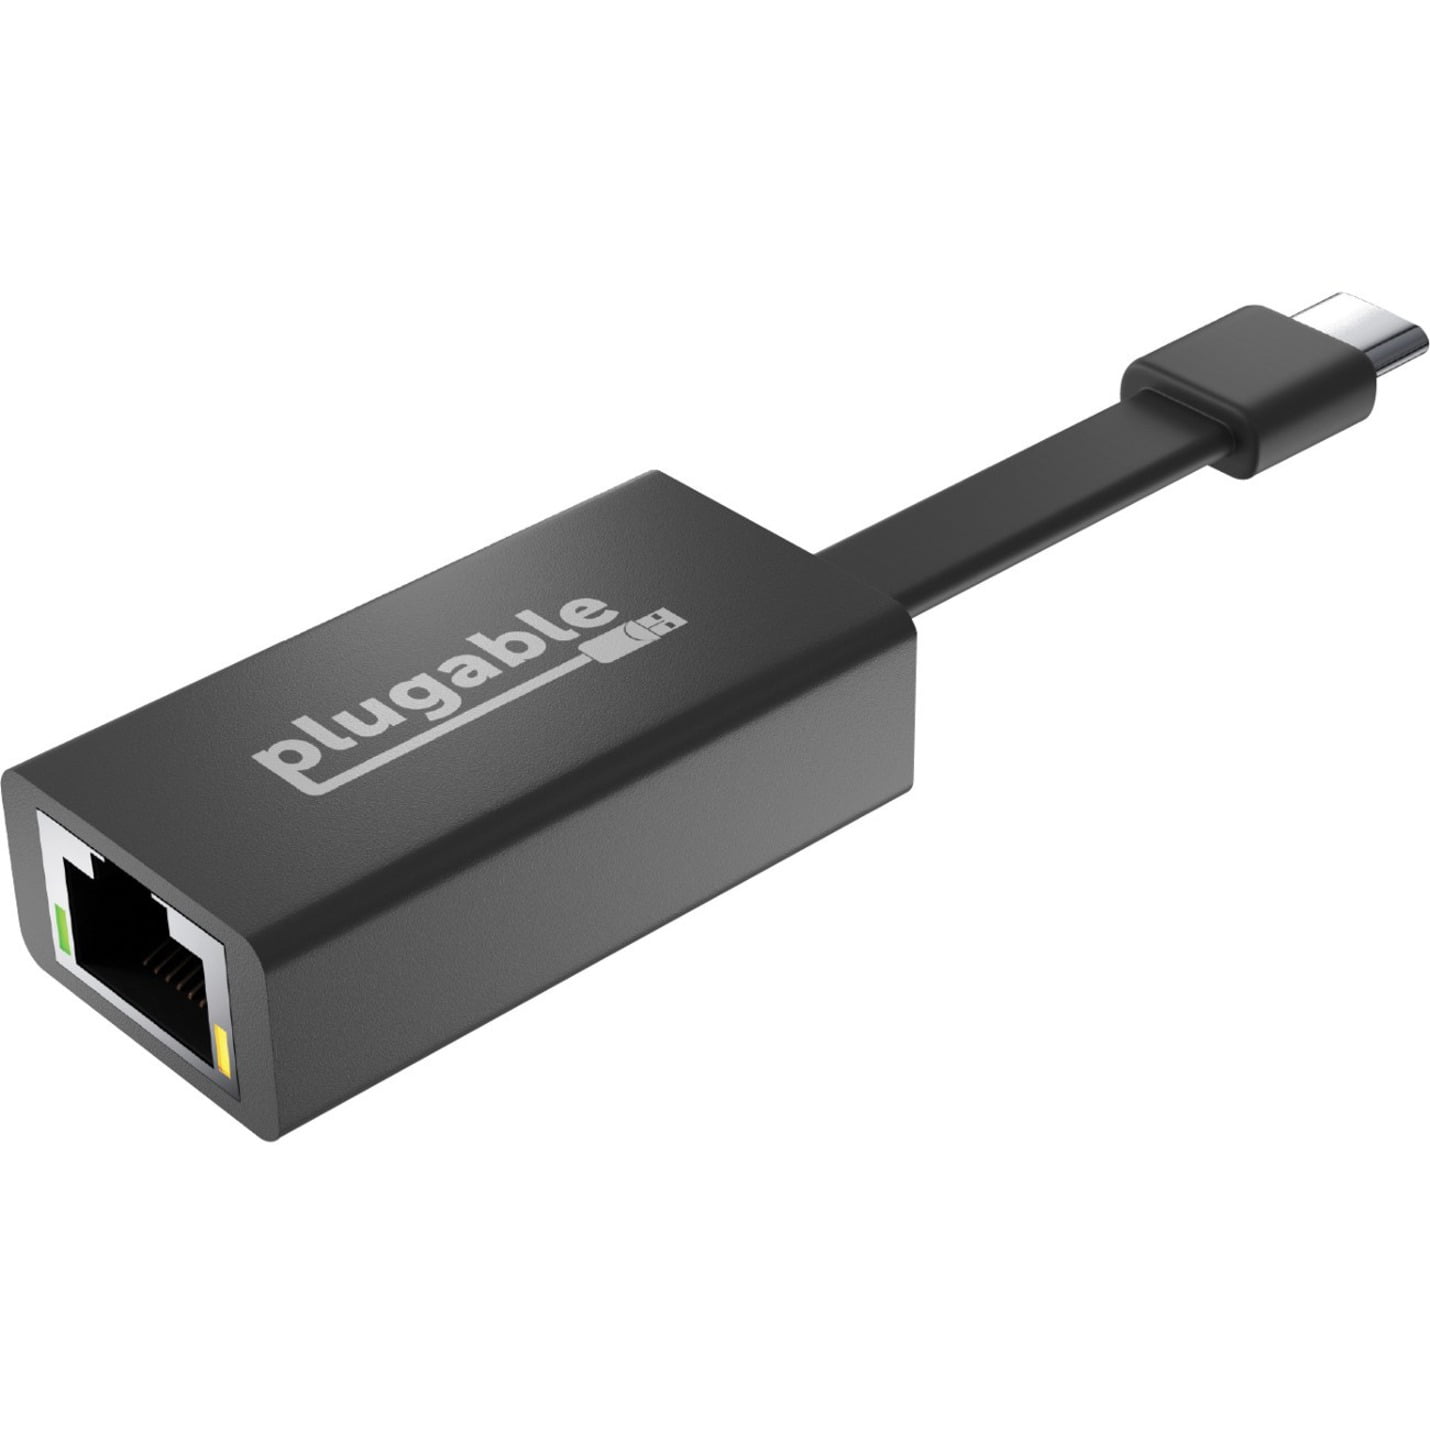 Compatible with Mac and Windows Connect USB-C Thunderbolt 4 or USB4 Laptops to HDMI Displays up to 4K@60Hz Plugable USB C to HDMI Cable 6ft Thunderbolt 3 HDMI 2.0 1.8m 